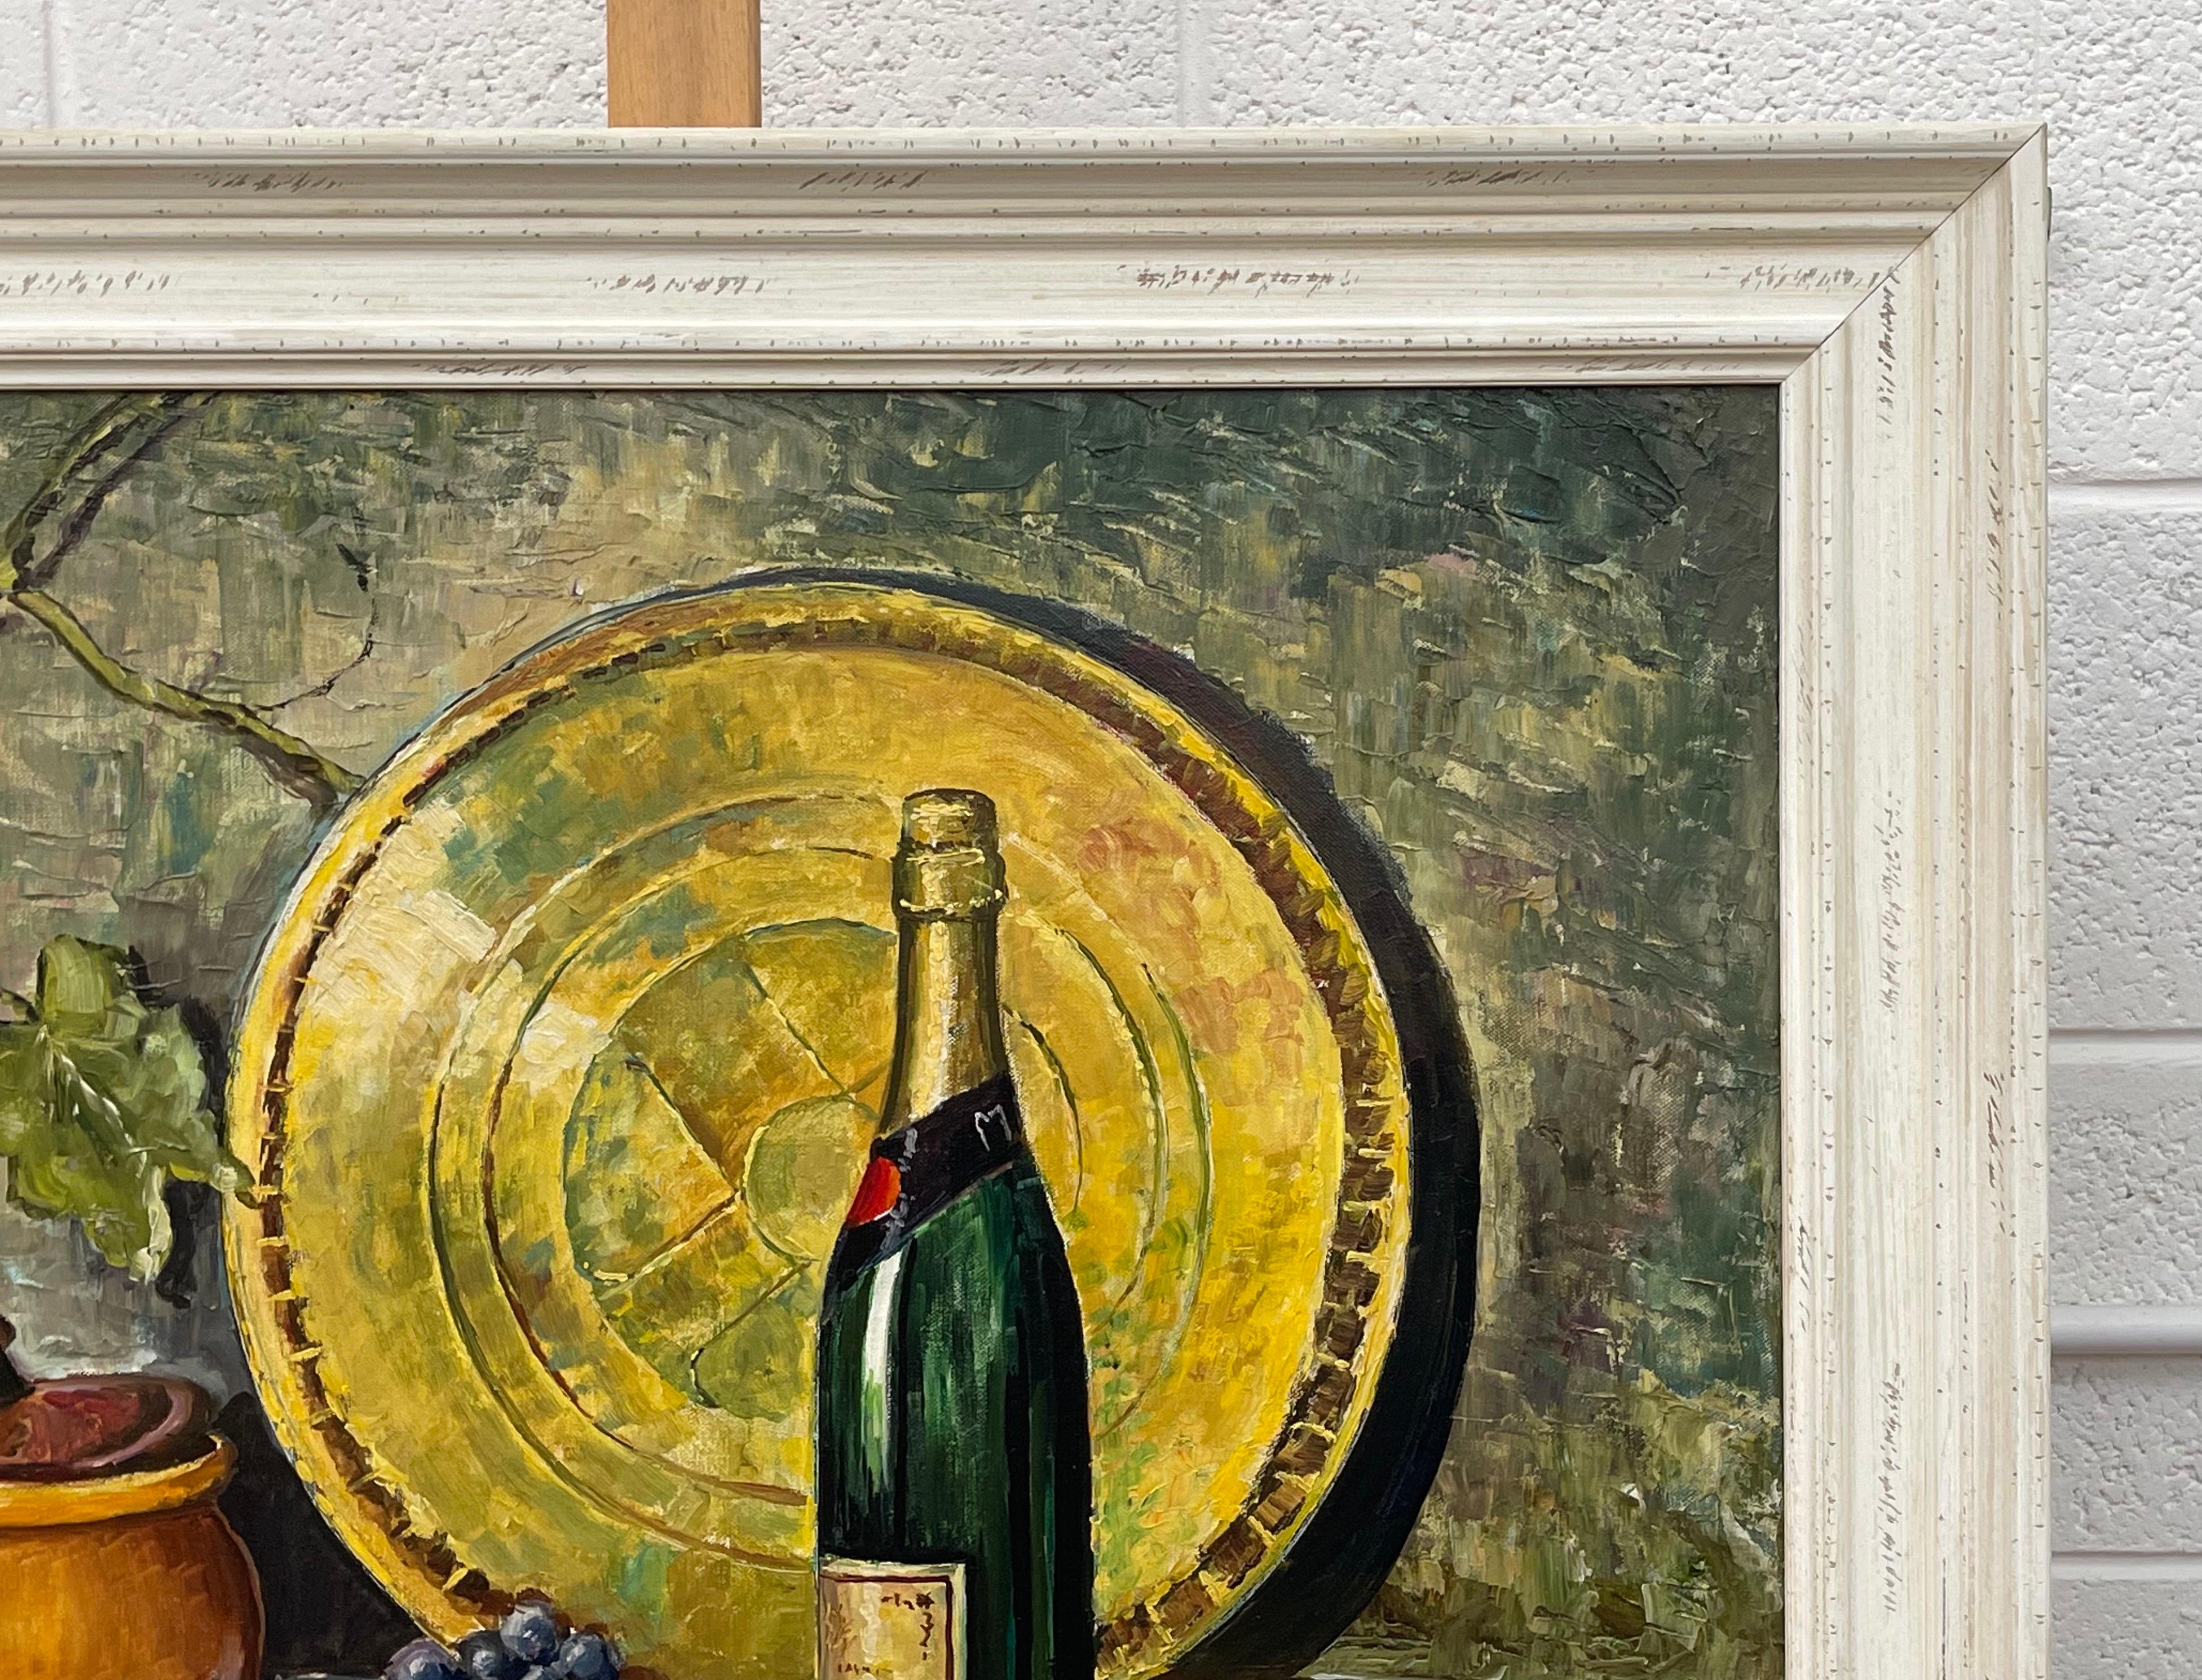 Champagne Bottle with Grapes Still Life Oil Painting by 20th Century Artist For Sale 5